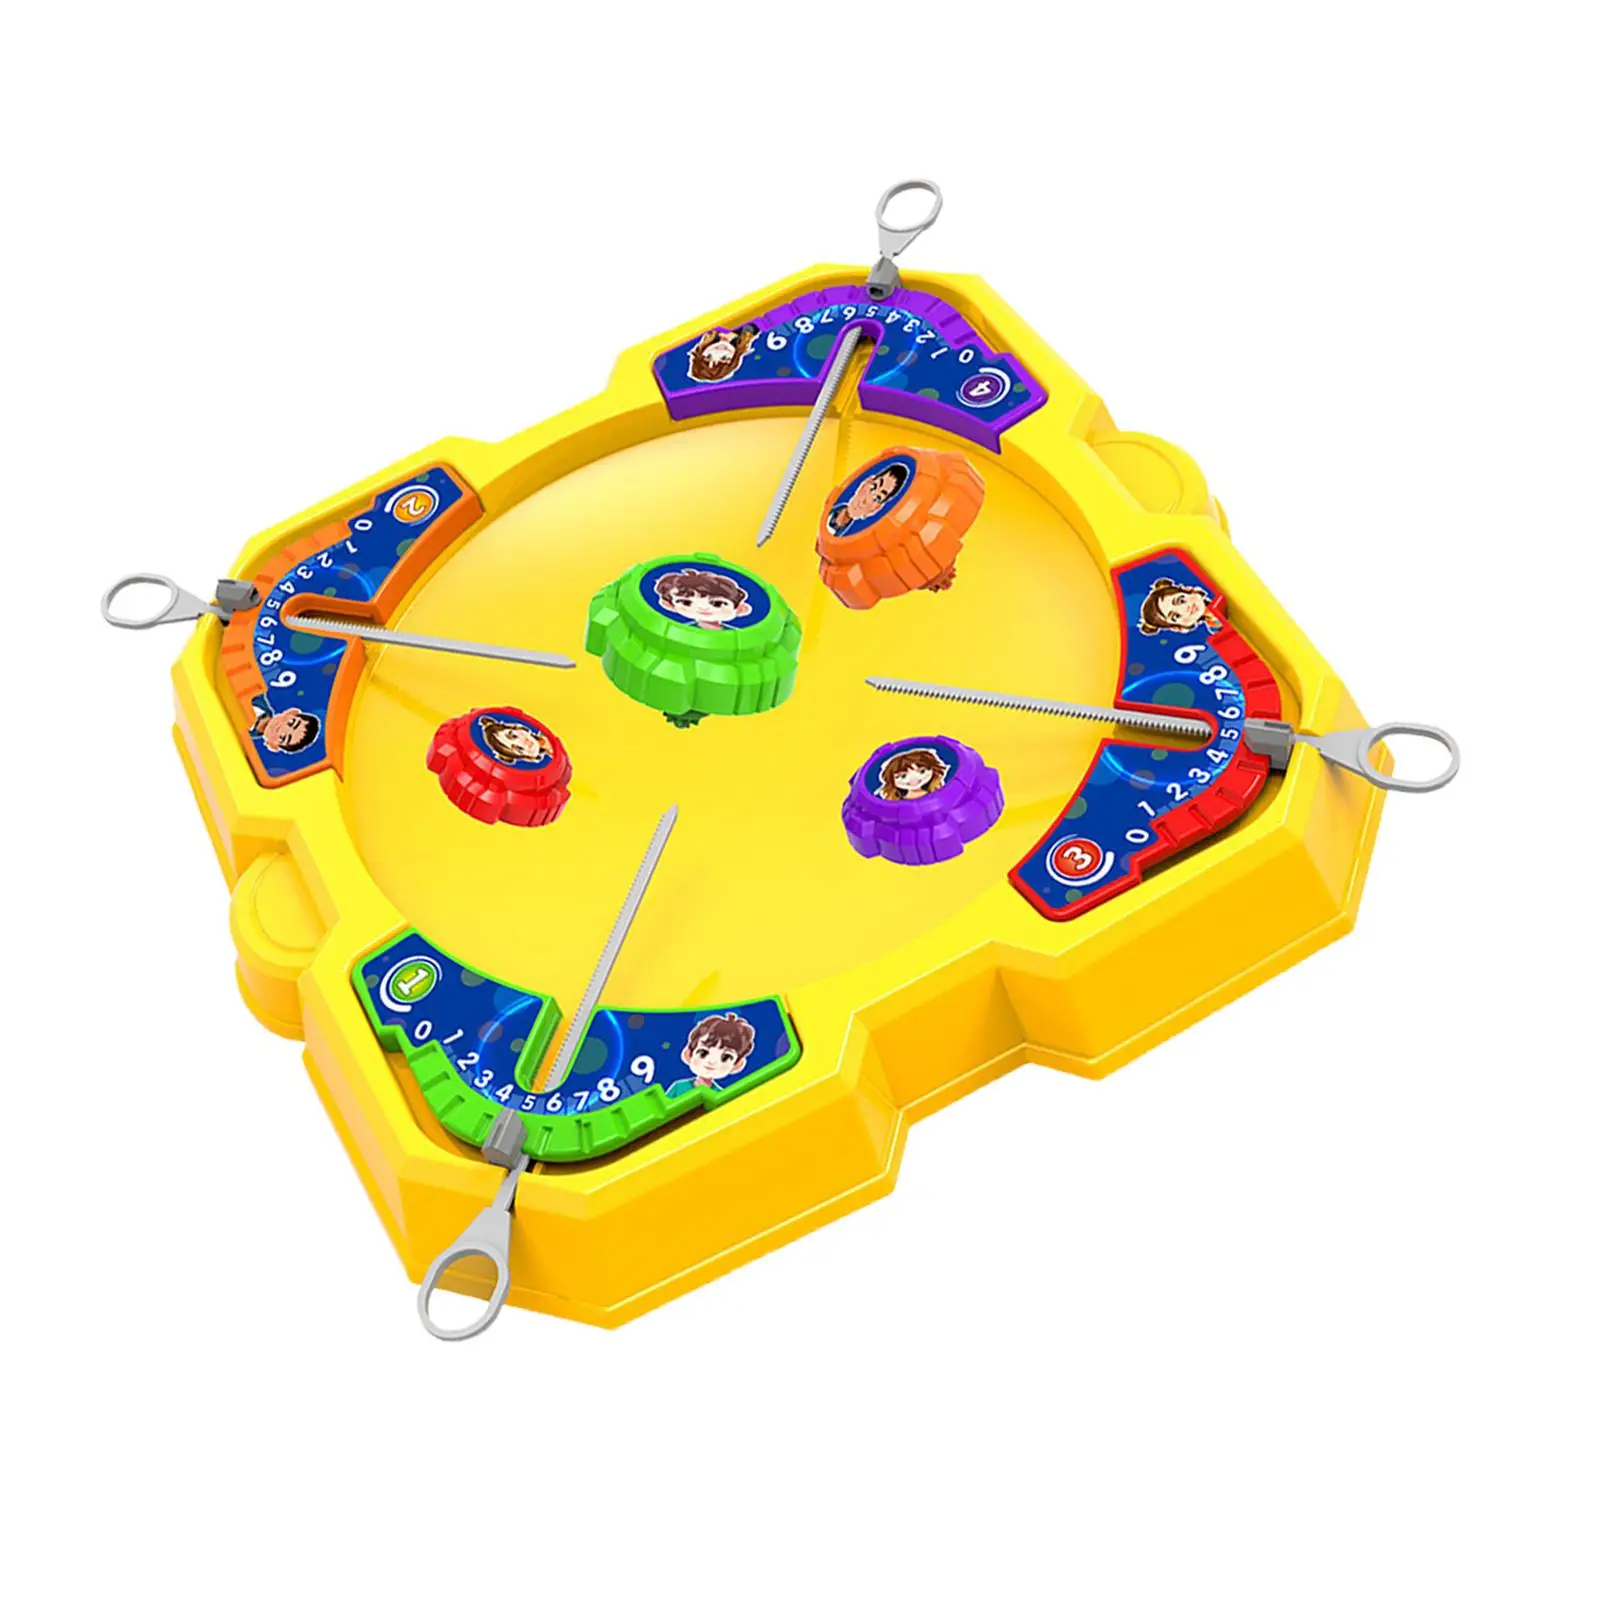 Gyro Toy Wear Resistant Activity Toy for Kindergarten Holiday Girls Boys